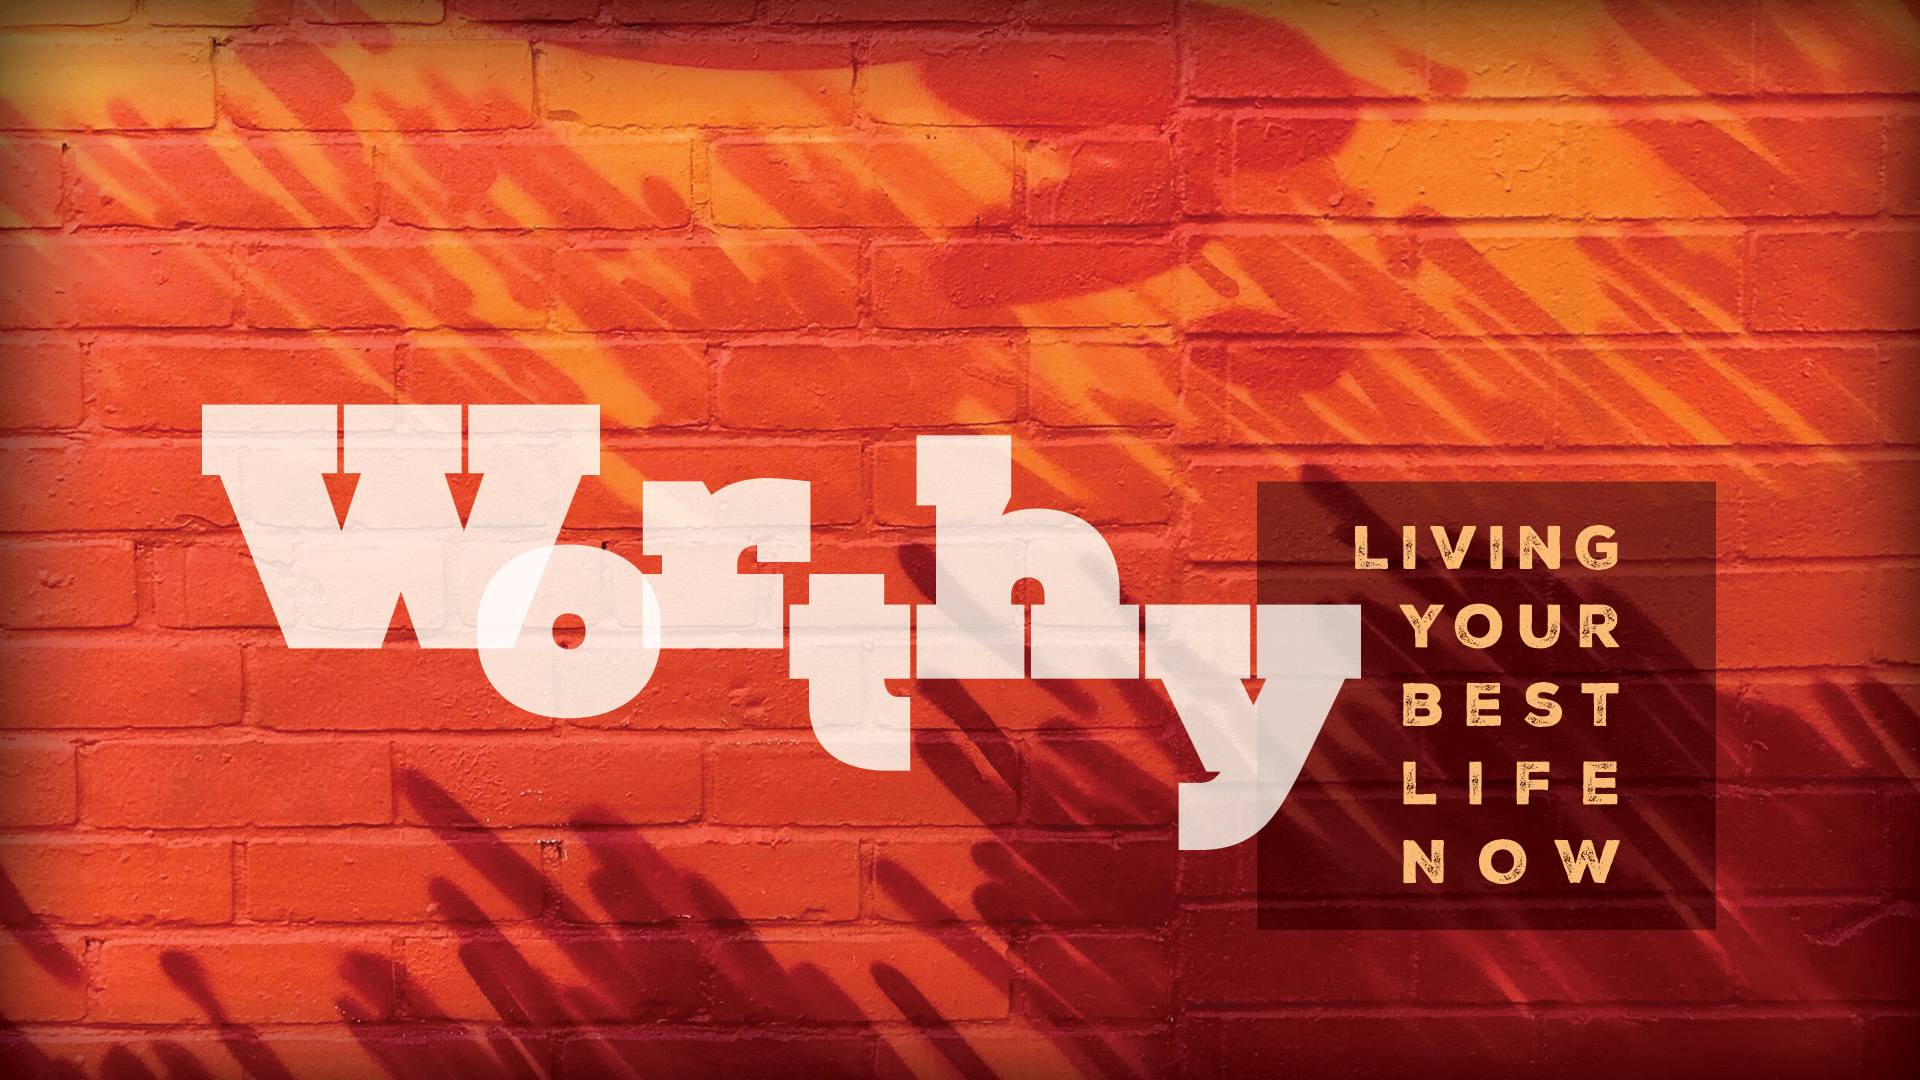 Worthy: Living Your Best Life Now
May 15–June 26
9:00 & 10:45 a.m.  | Oak Brook
10:00 a.m. | Butterfield
